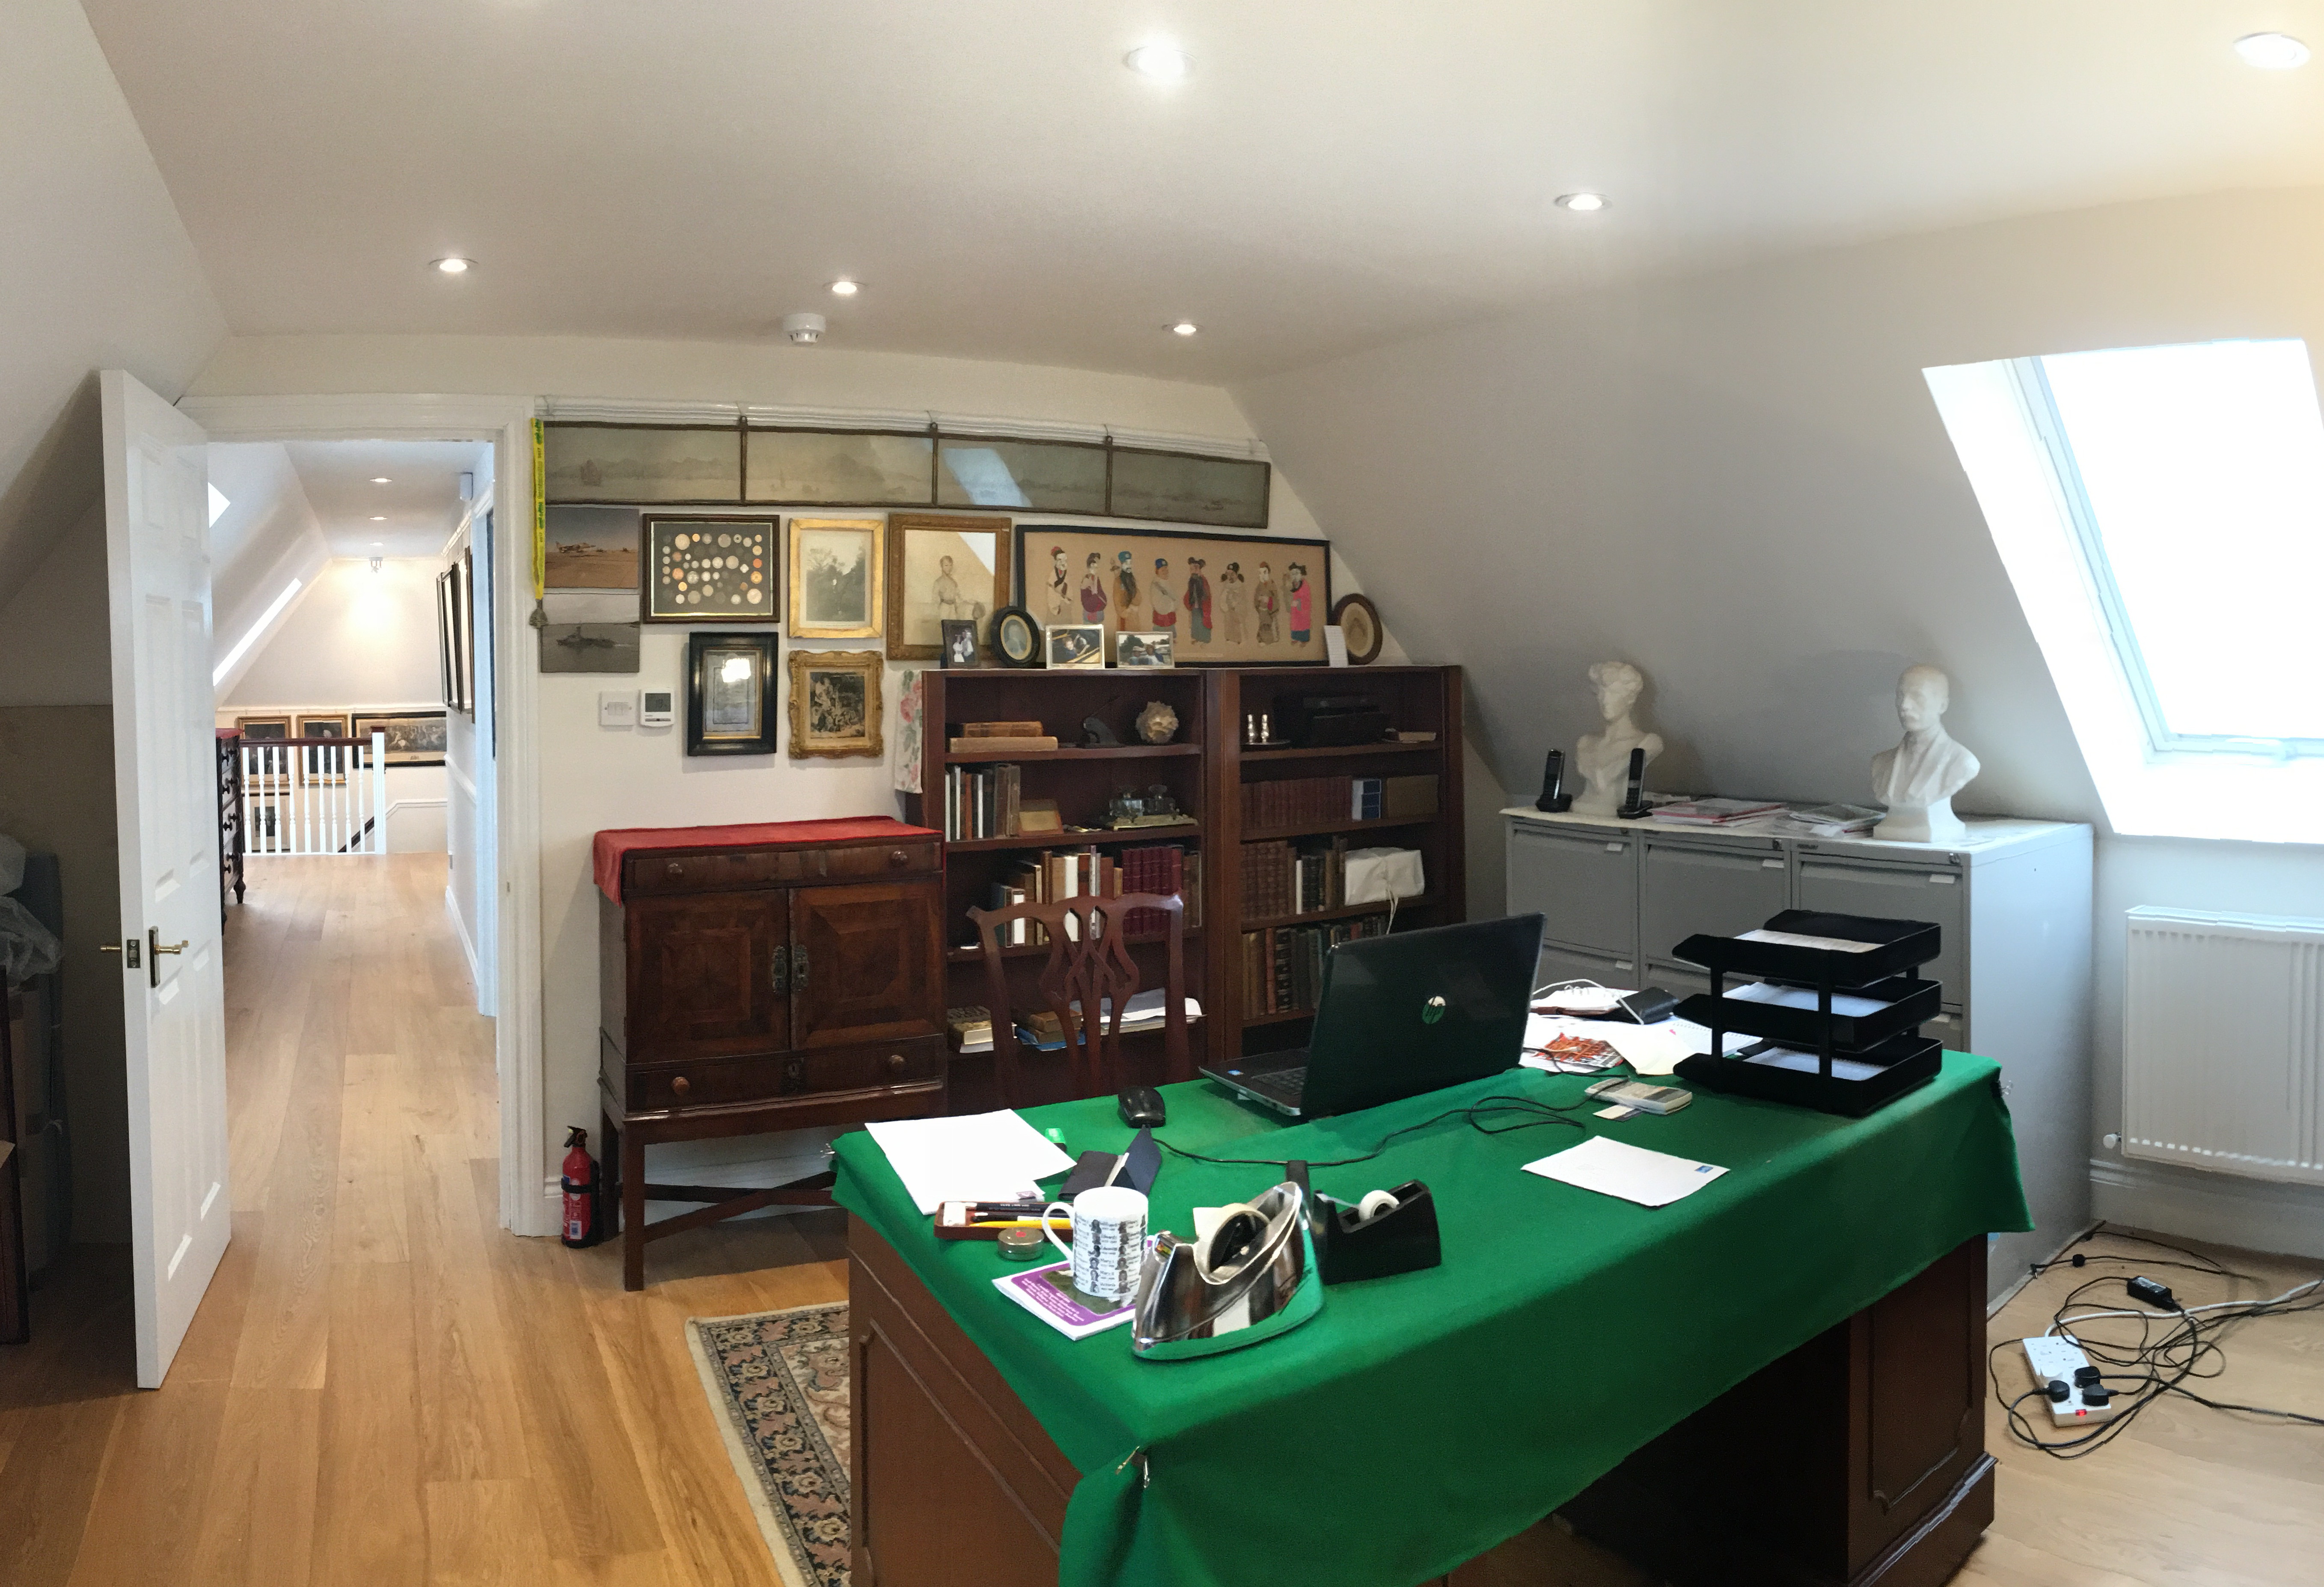 Office in the loft conversion